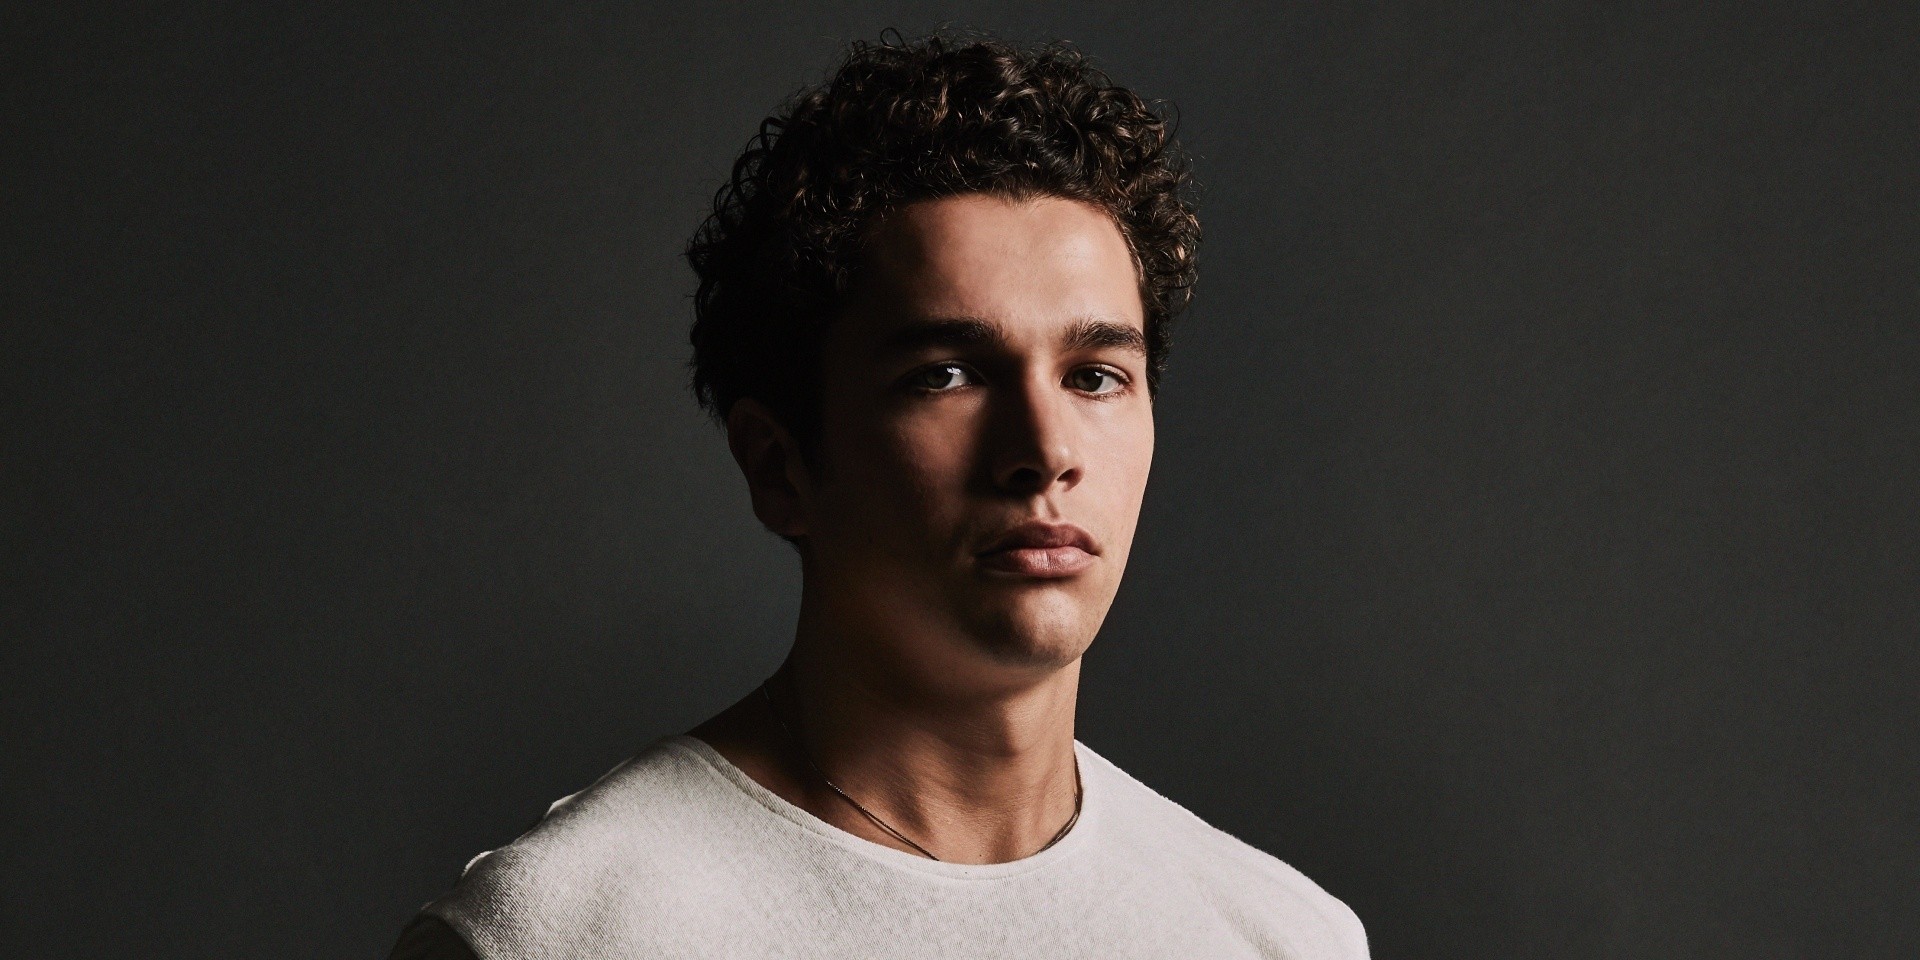 "I like R&B because it's got soul": An interview with Austin Mahone